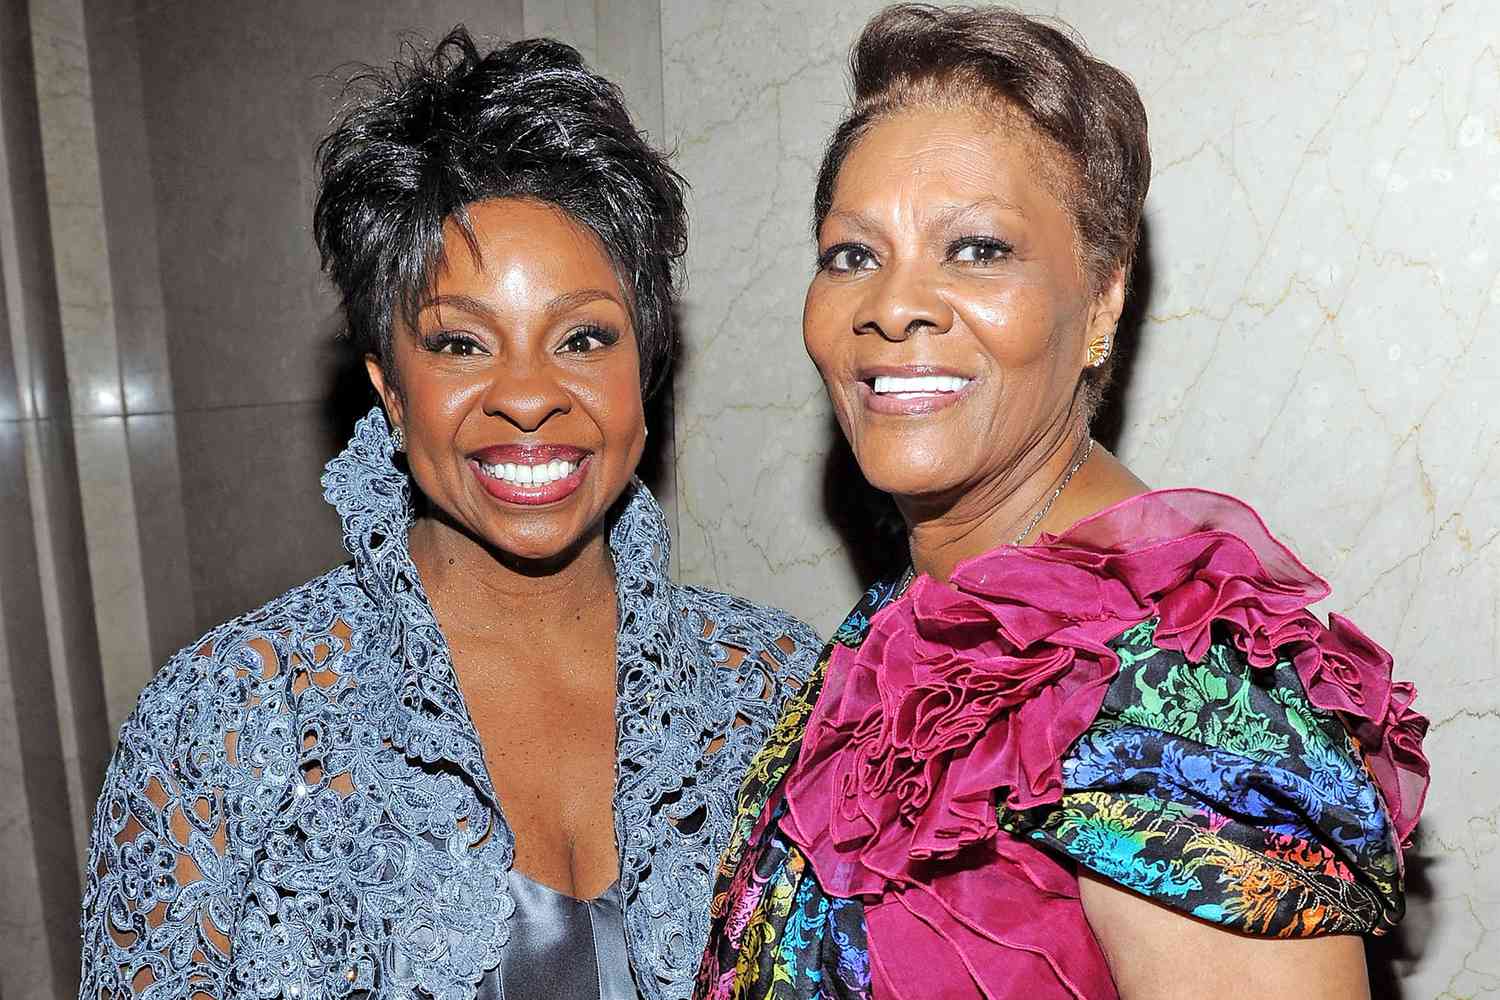 Dionne Warwick and Gladys Knight react after being mistaken for each other ...